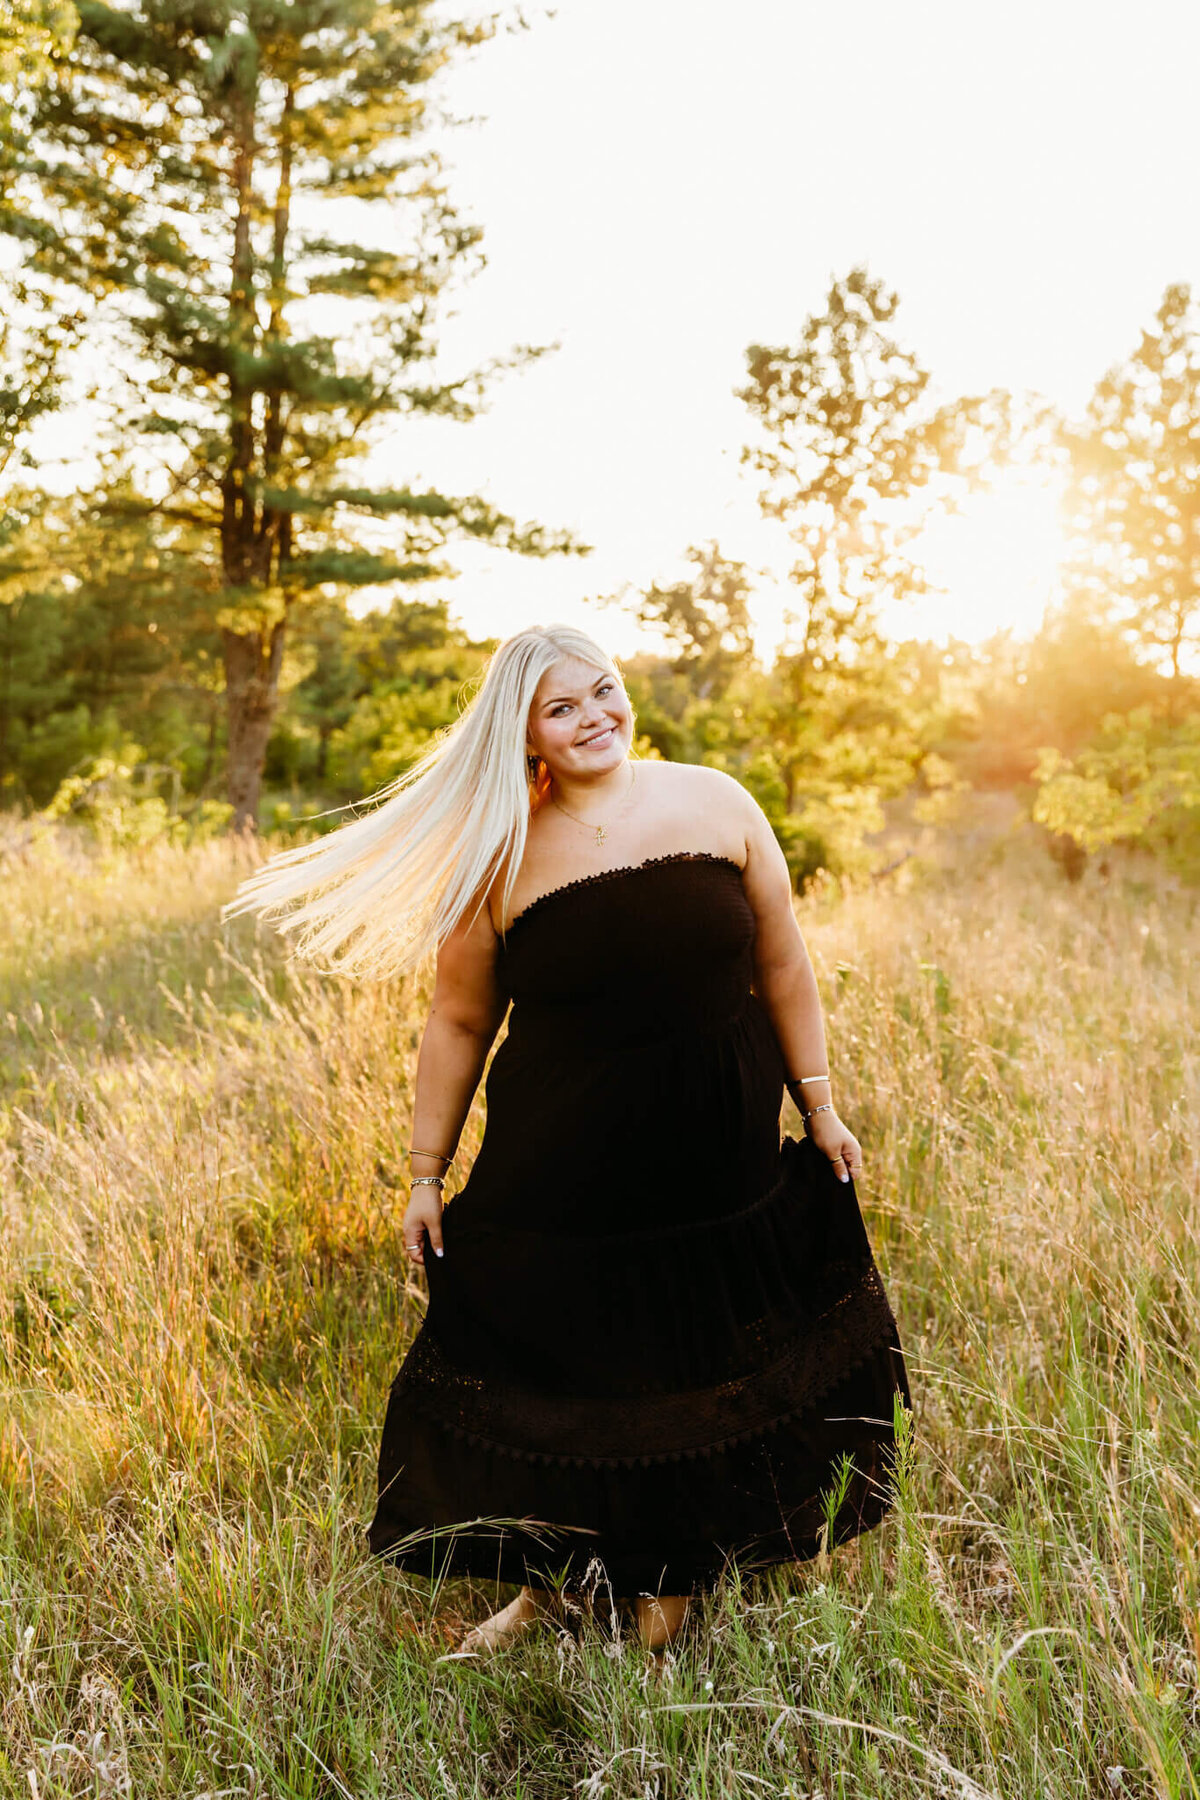 stunning high school girl in a black dress twirling in a grassy field at sunset